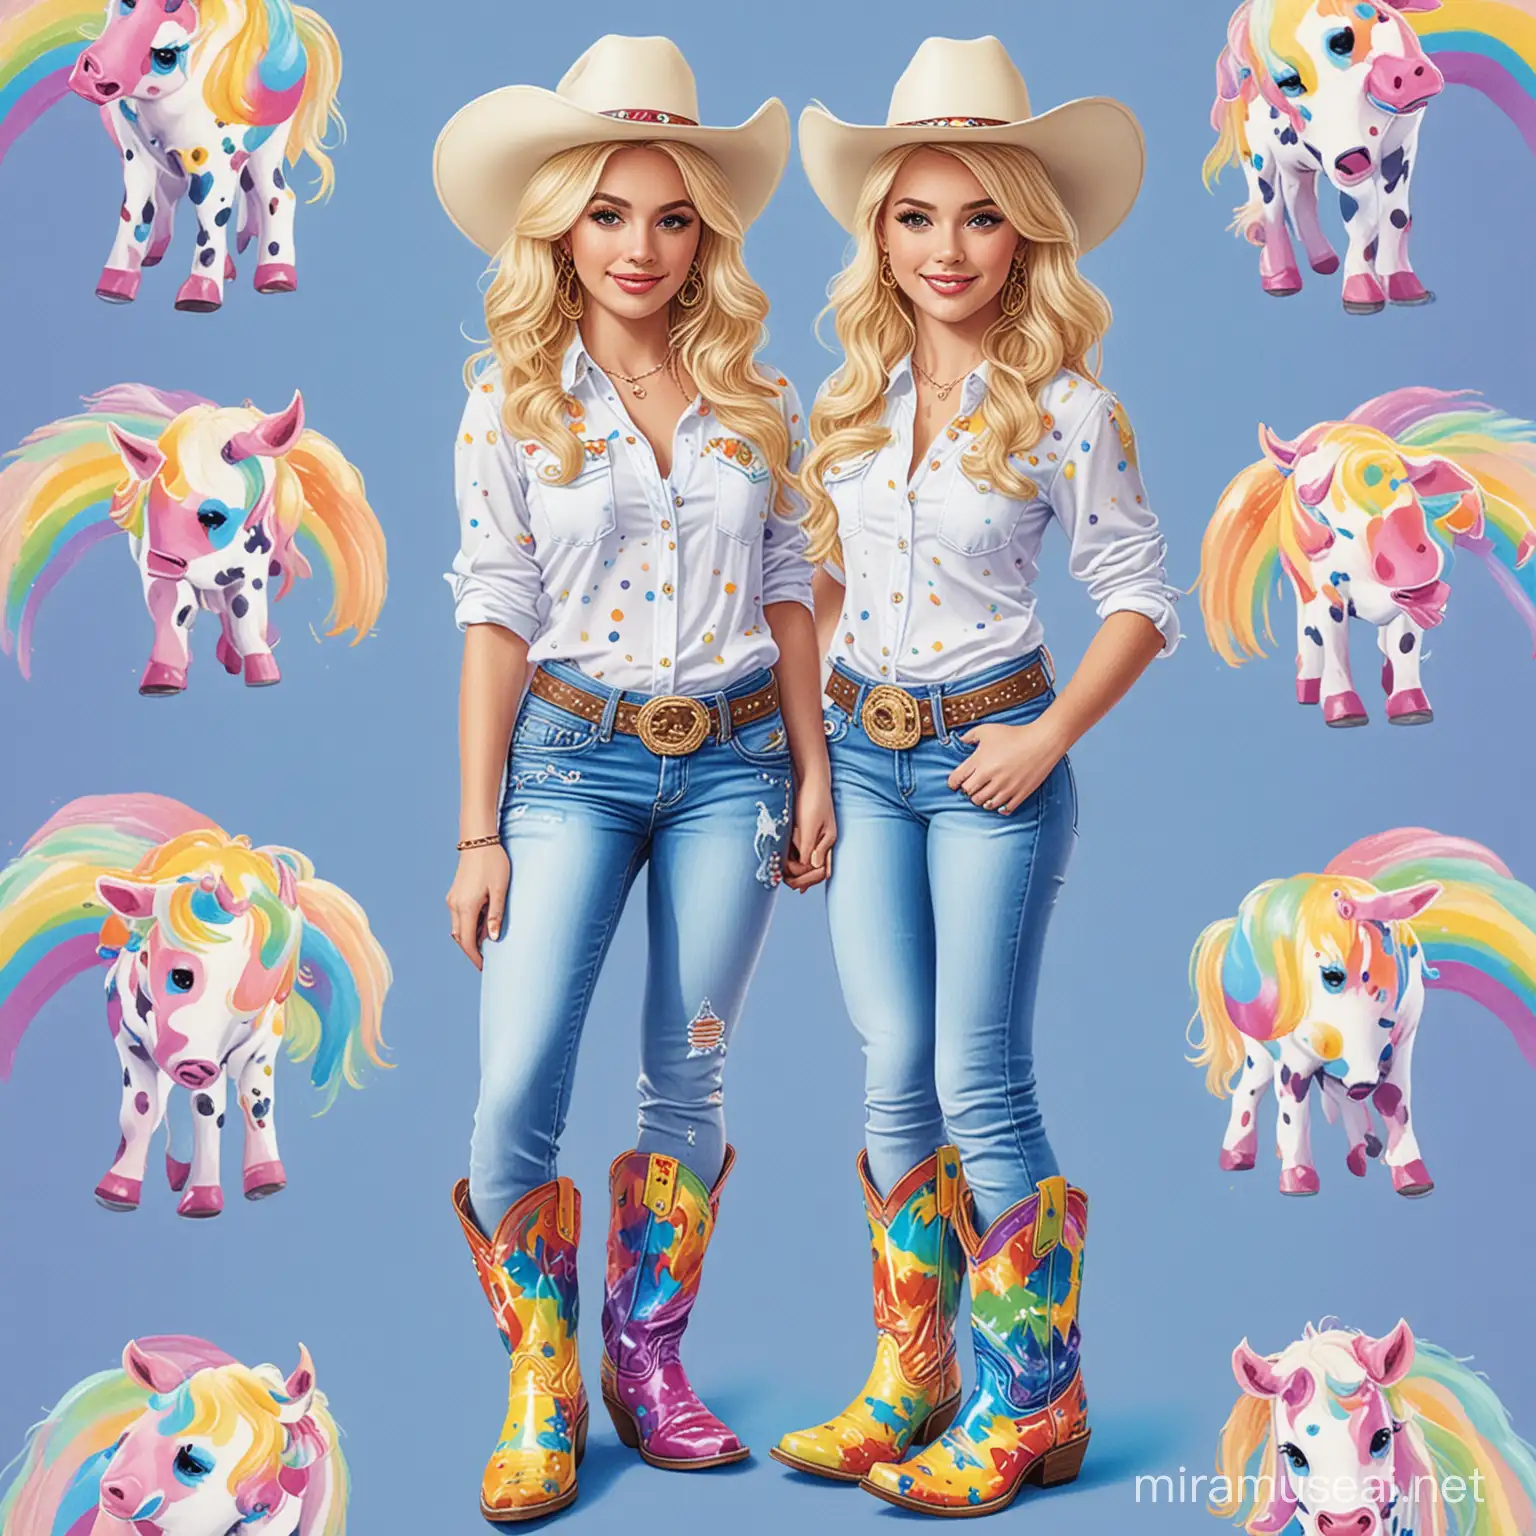 Blonde Cowgirl with Rainbow Cowboy Boots Lisa Frank Inspired Cartoon Illustration